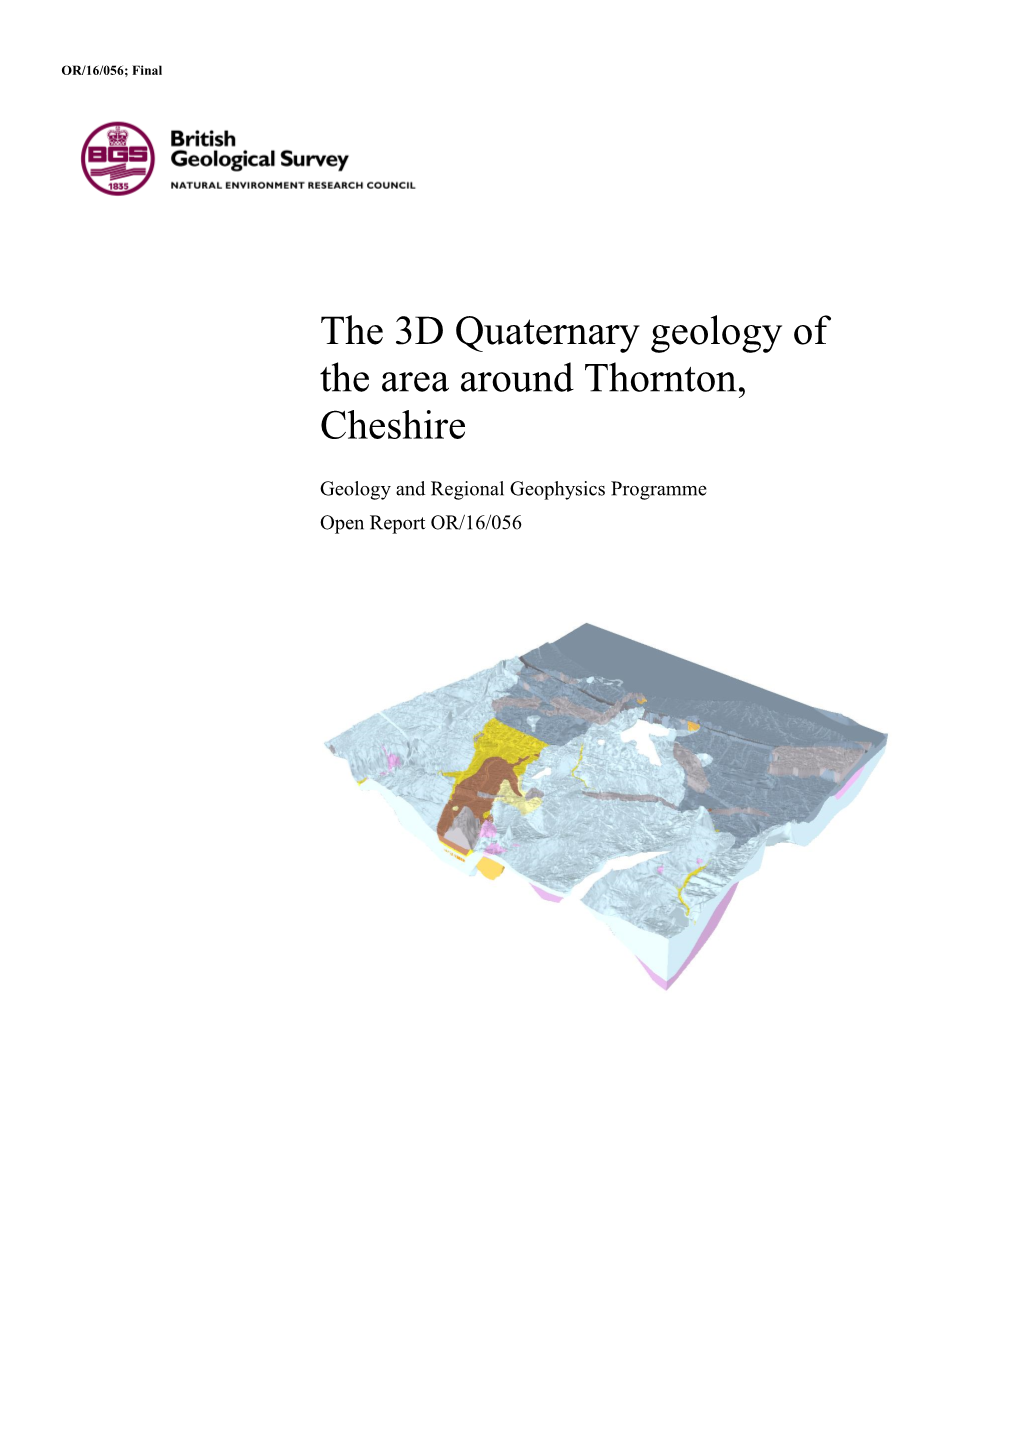 The 3D Quaternary Geology of the Area Around Thornton, Cheshire